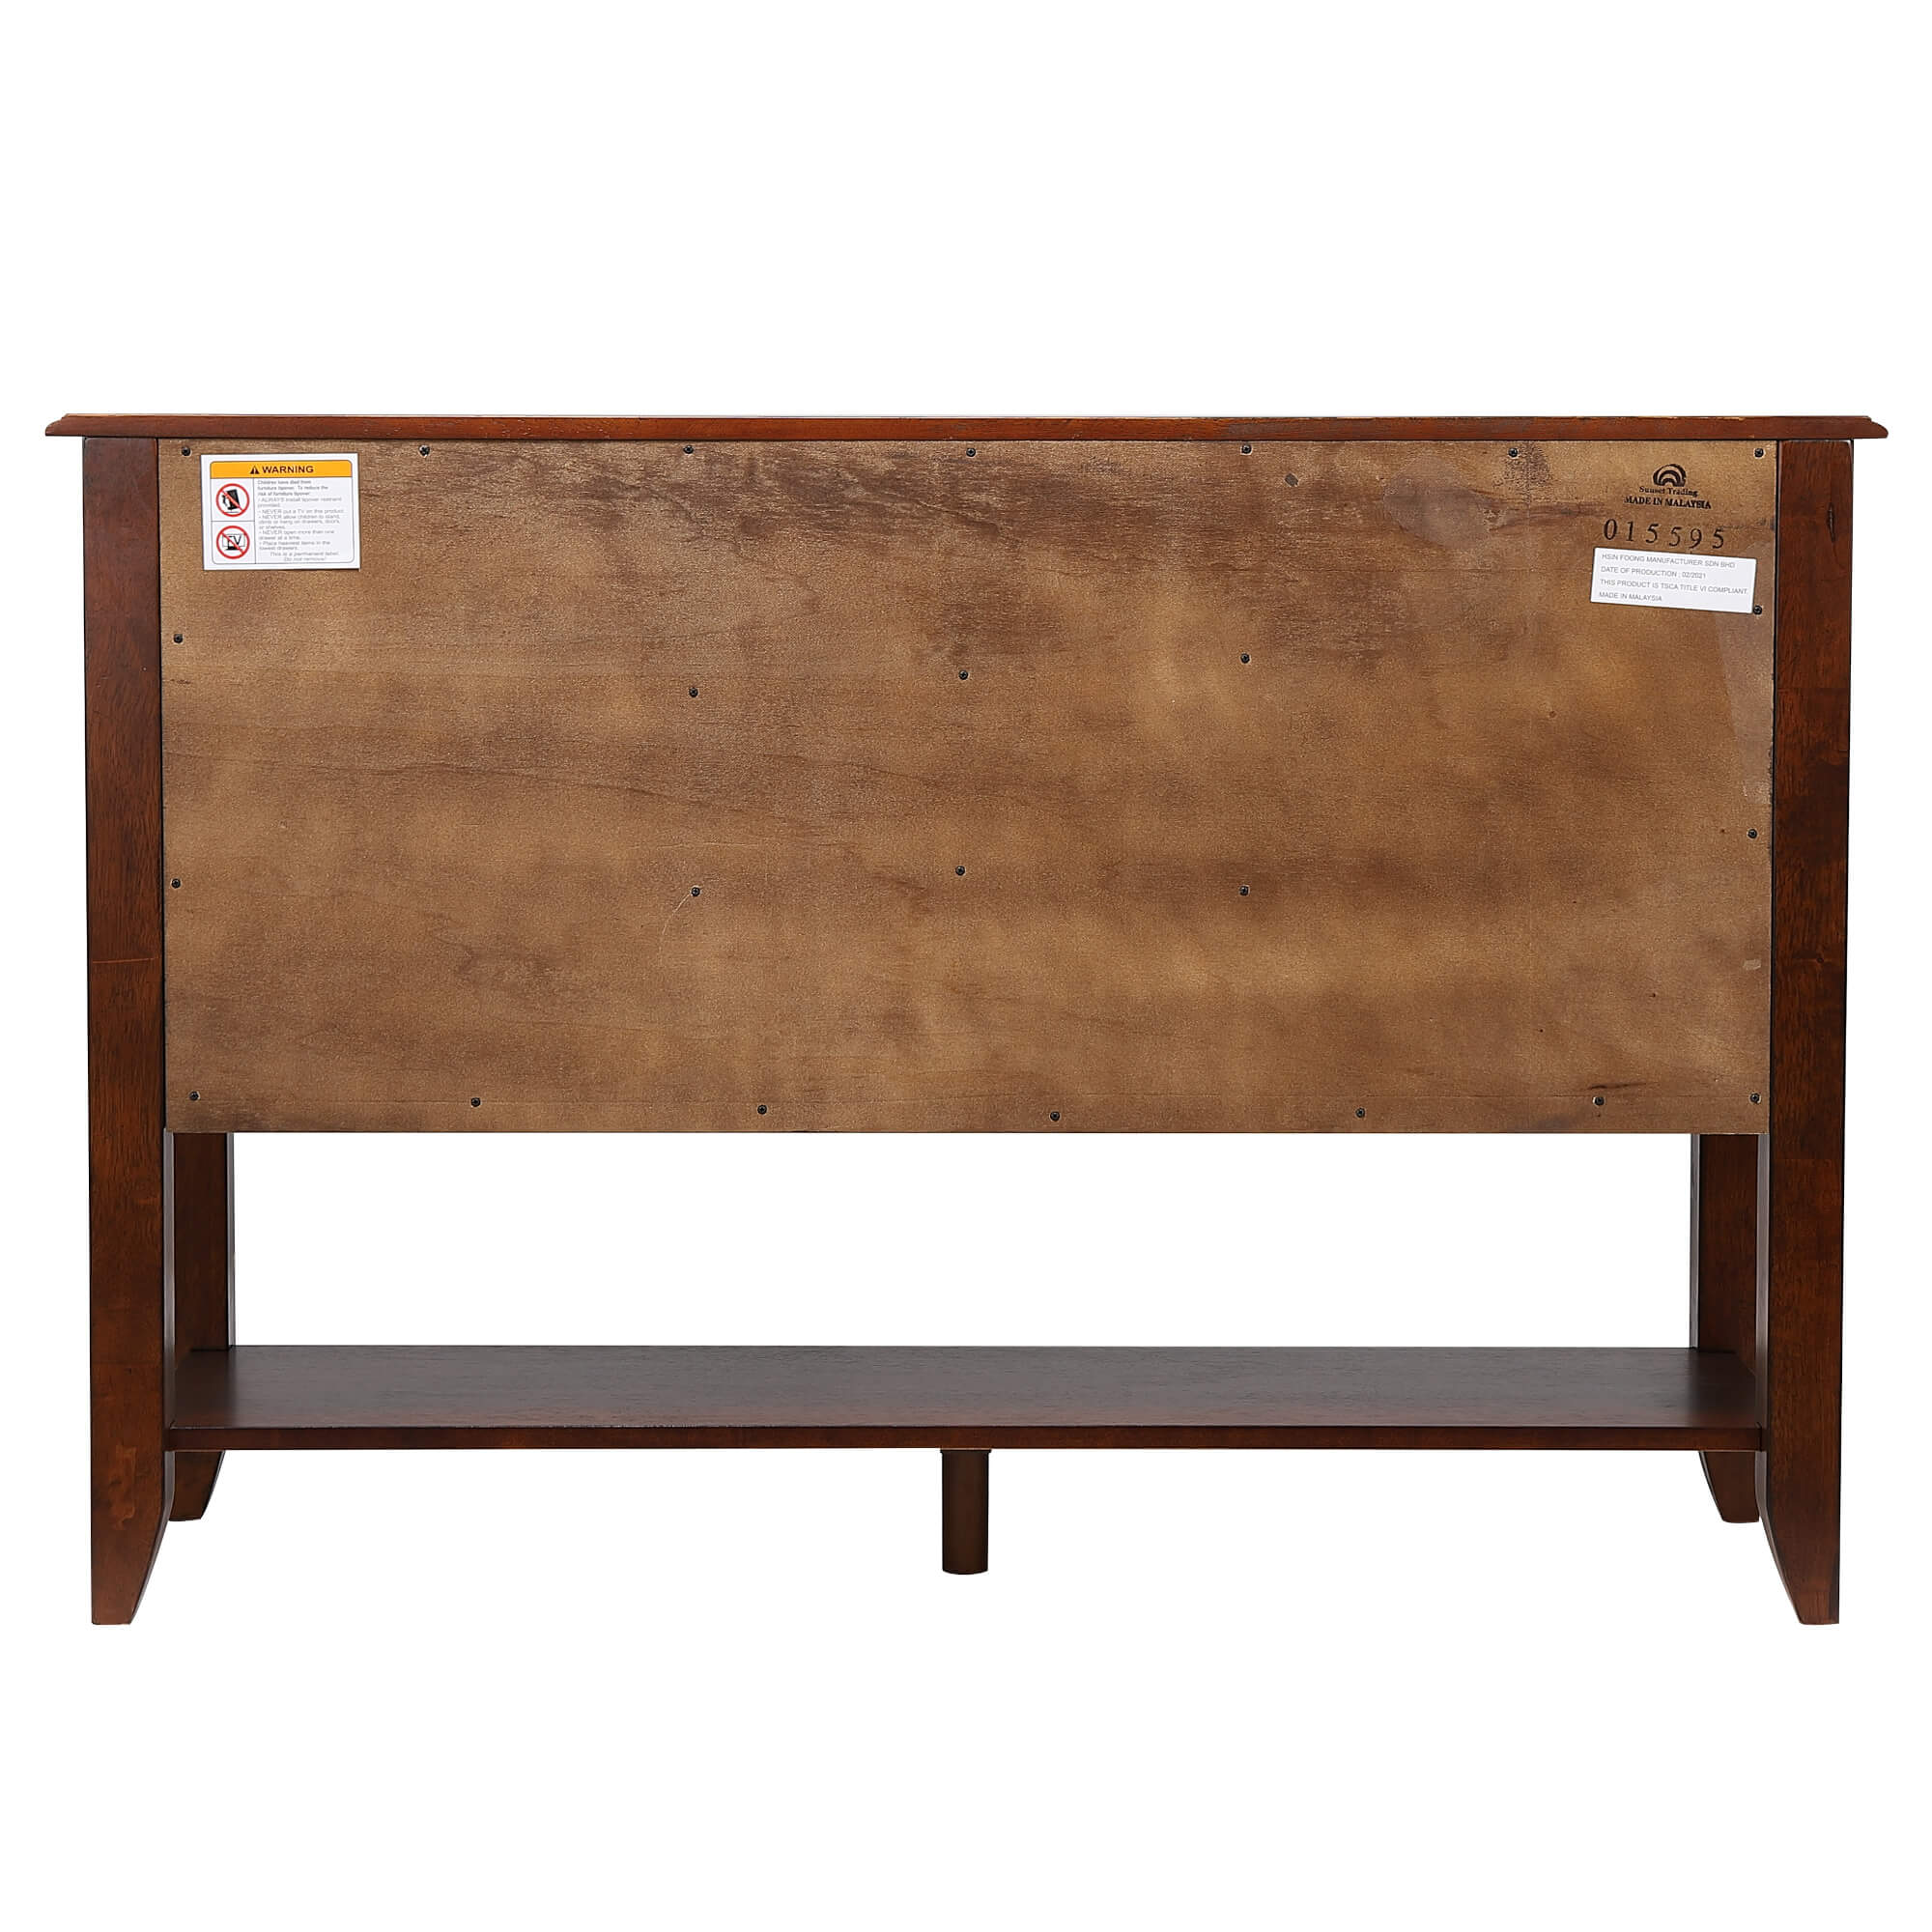 Andrews Collection-Sideboard in Chestnut-Back view-DLU-1122-SB-CT